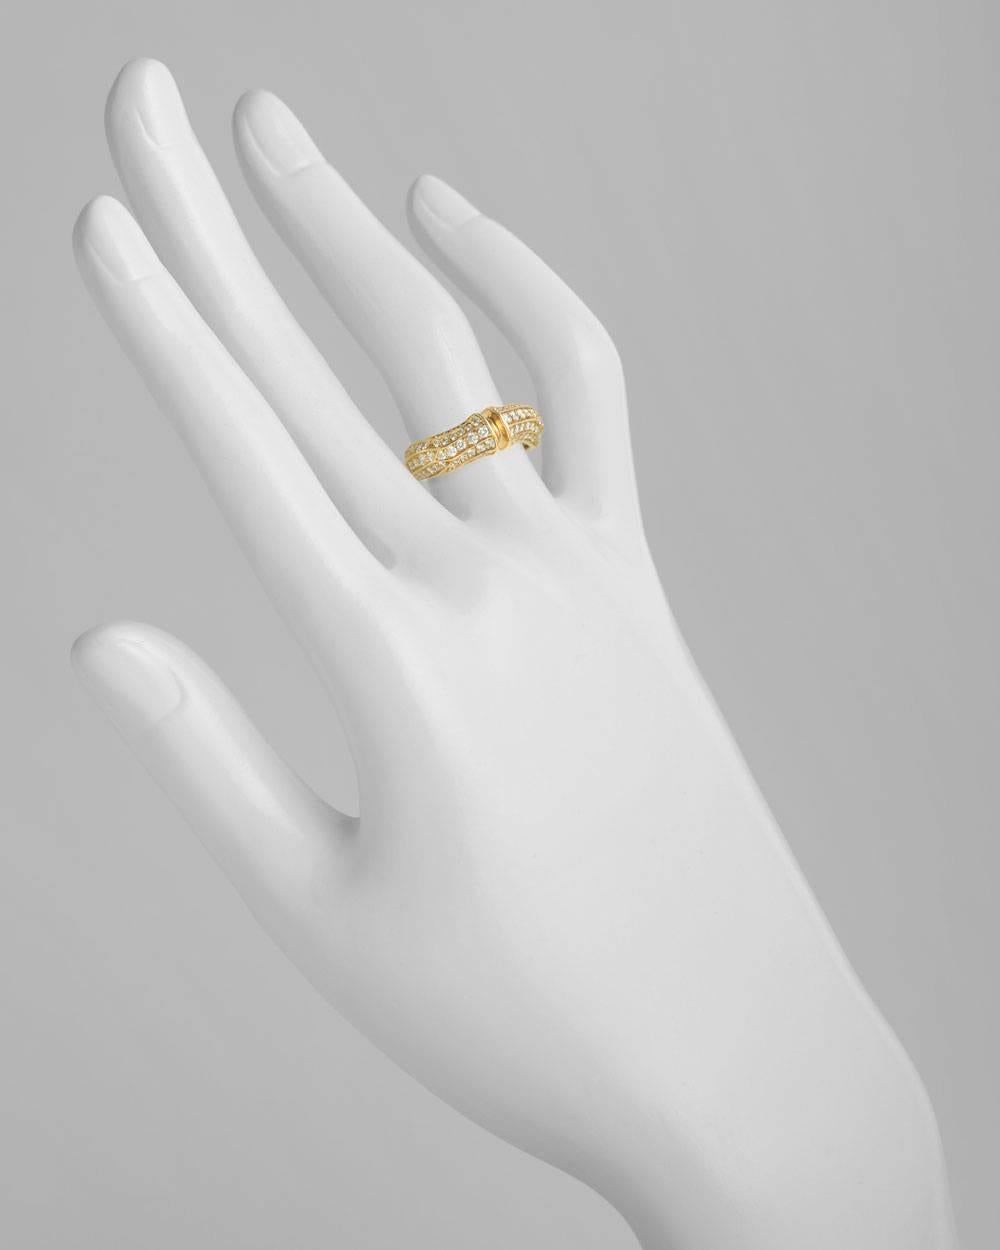 Diamond-set bamboo-motif band ring, mounted in 18k yellow gold, set with round brilliant cut diamonds weighing approximately 0.95 total carats (G color/VVS-VS clarity), numbered 693233, signed Cartier. Size 4.5 (European - 48).